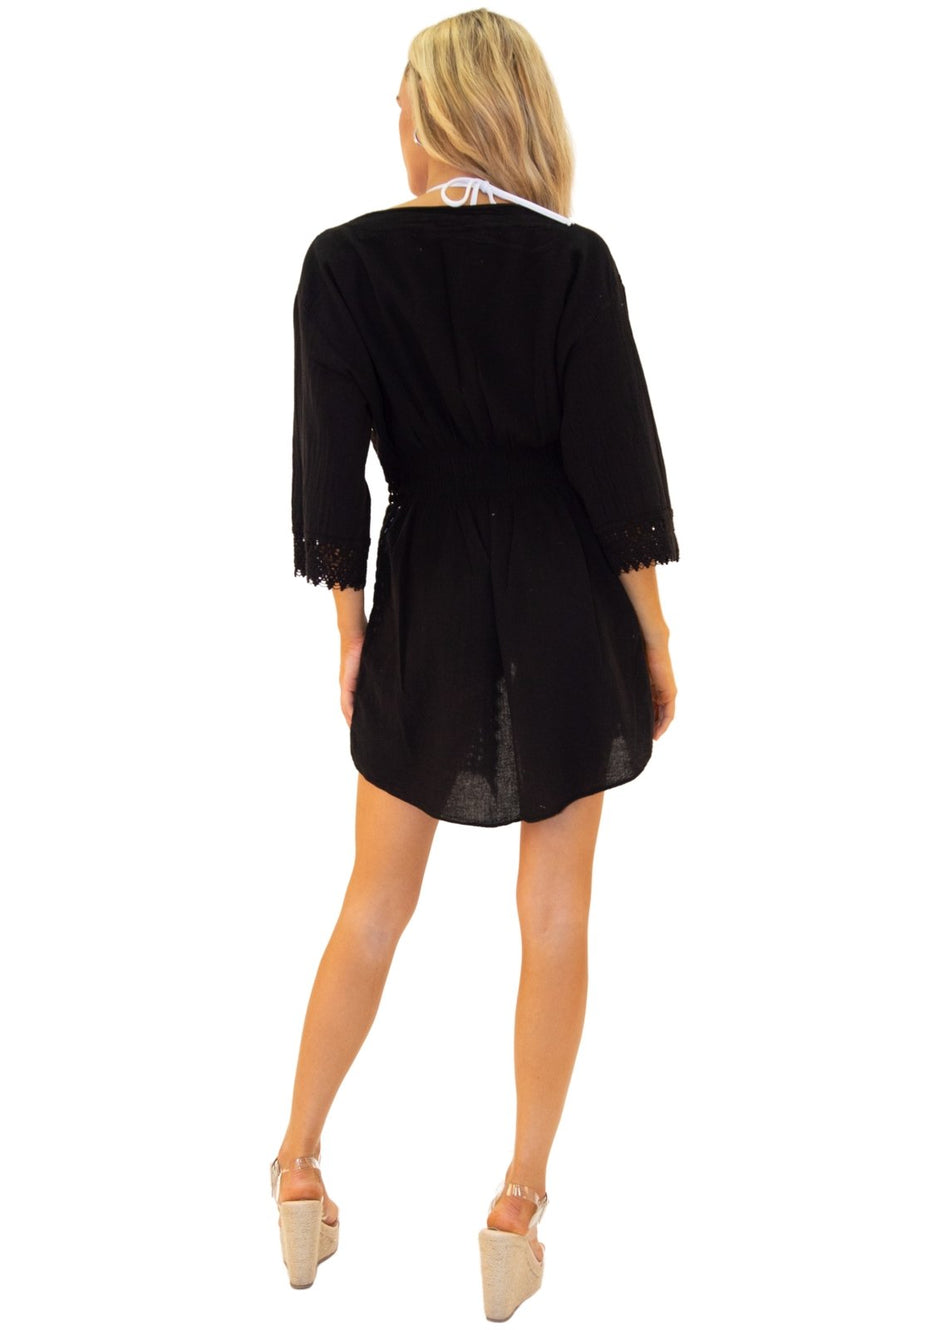 'Sandy' Cardigan Cover-Up